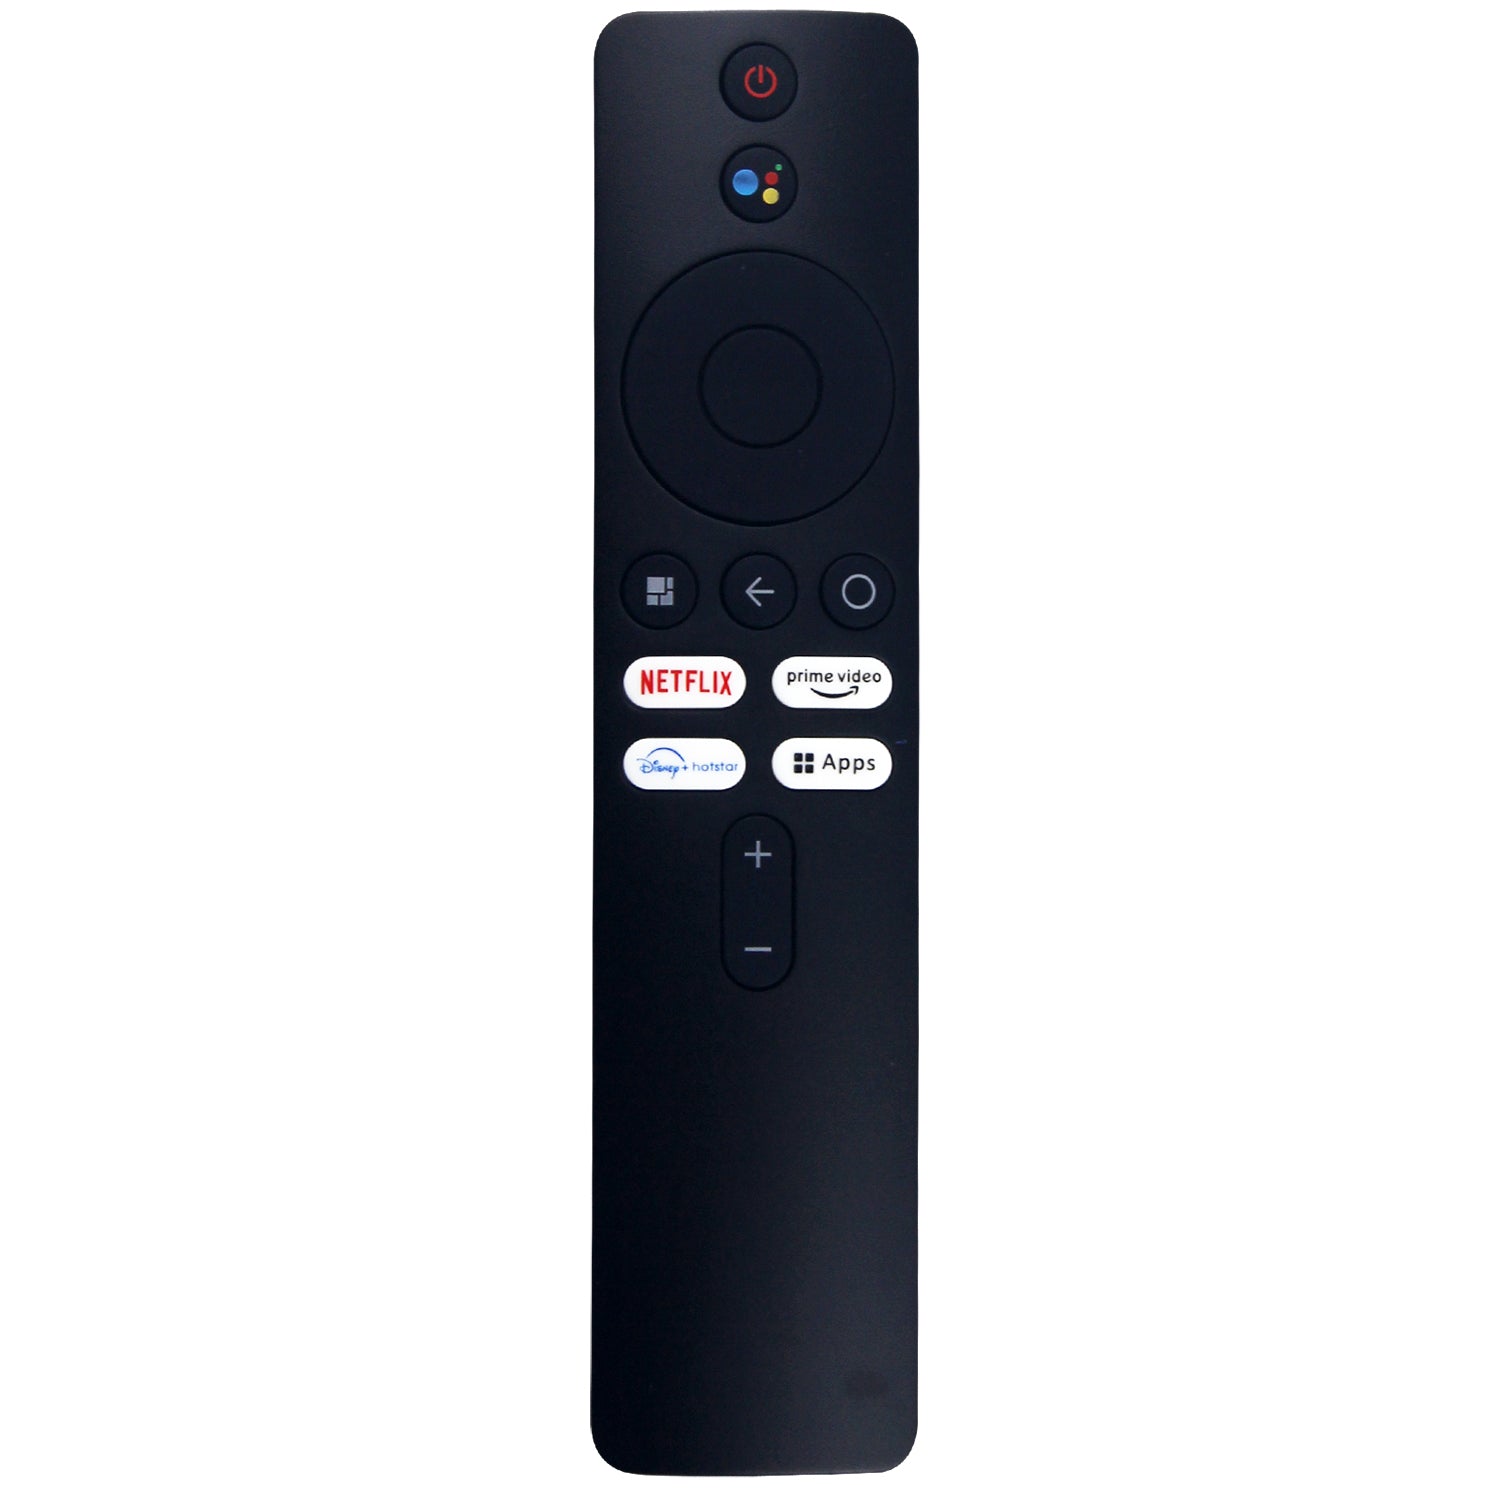 XMRM-M8 Voice Bluetooth Remote Control Replacement for Xiaomi Mi TV 5A Series